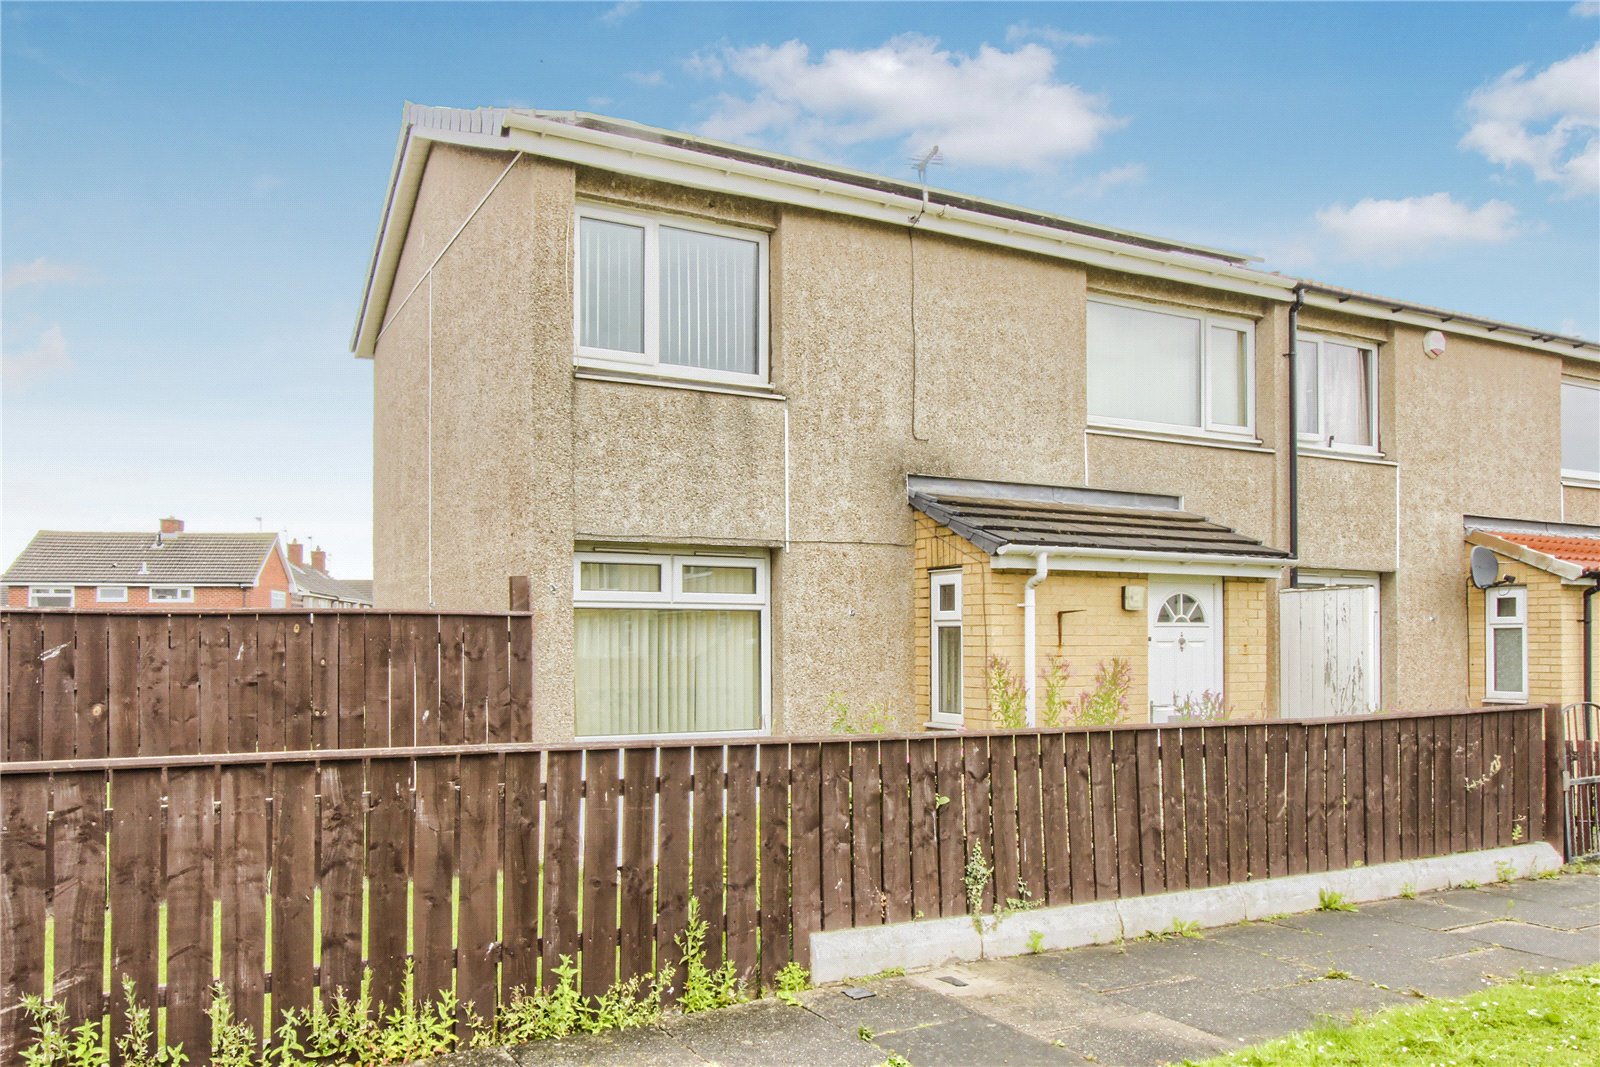 2 bed house for sale in Sedgebrook Gardens, Netherfields - Property Image 1